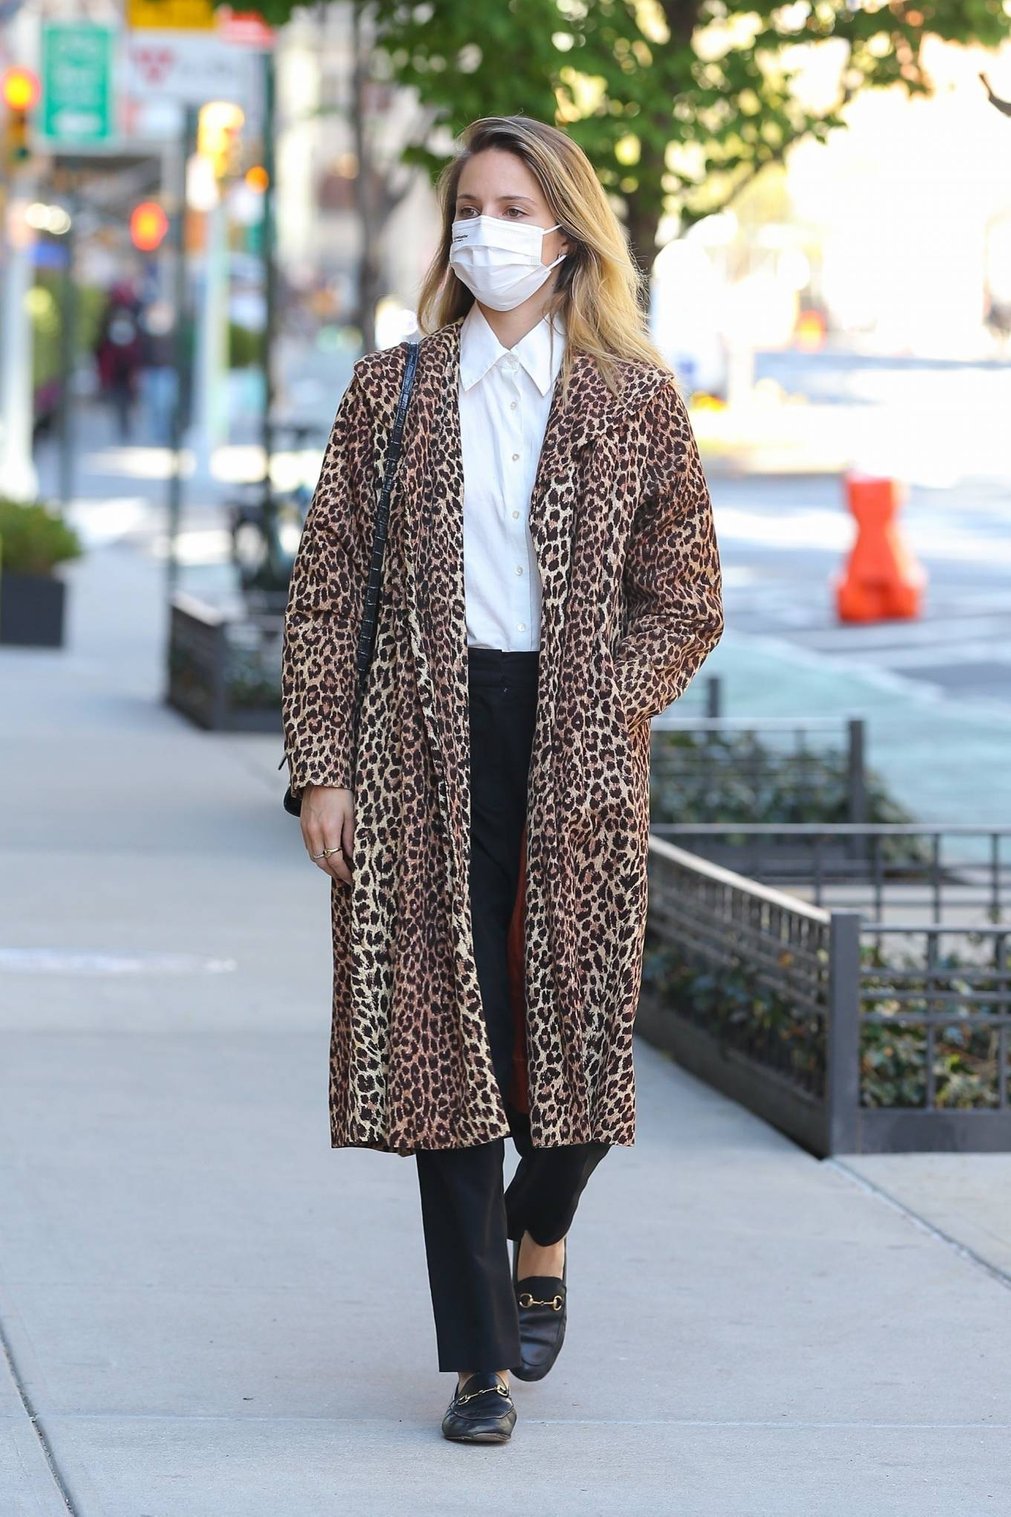 Dianna Agron 2021 : Dianna Agron – In a leopard print overcoat while out in New York-06